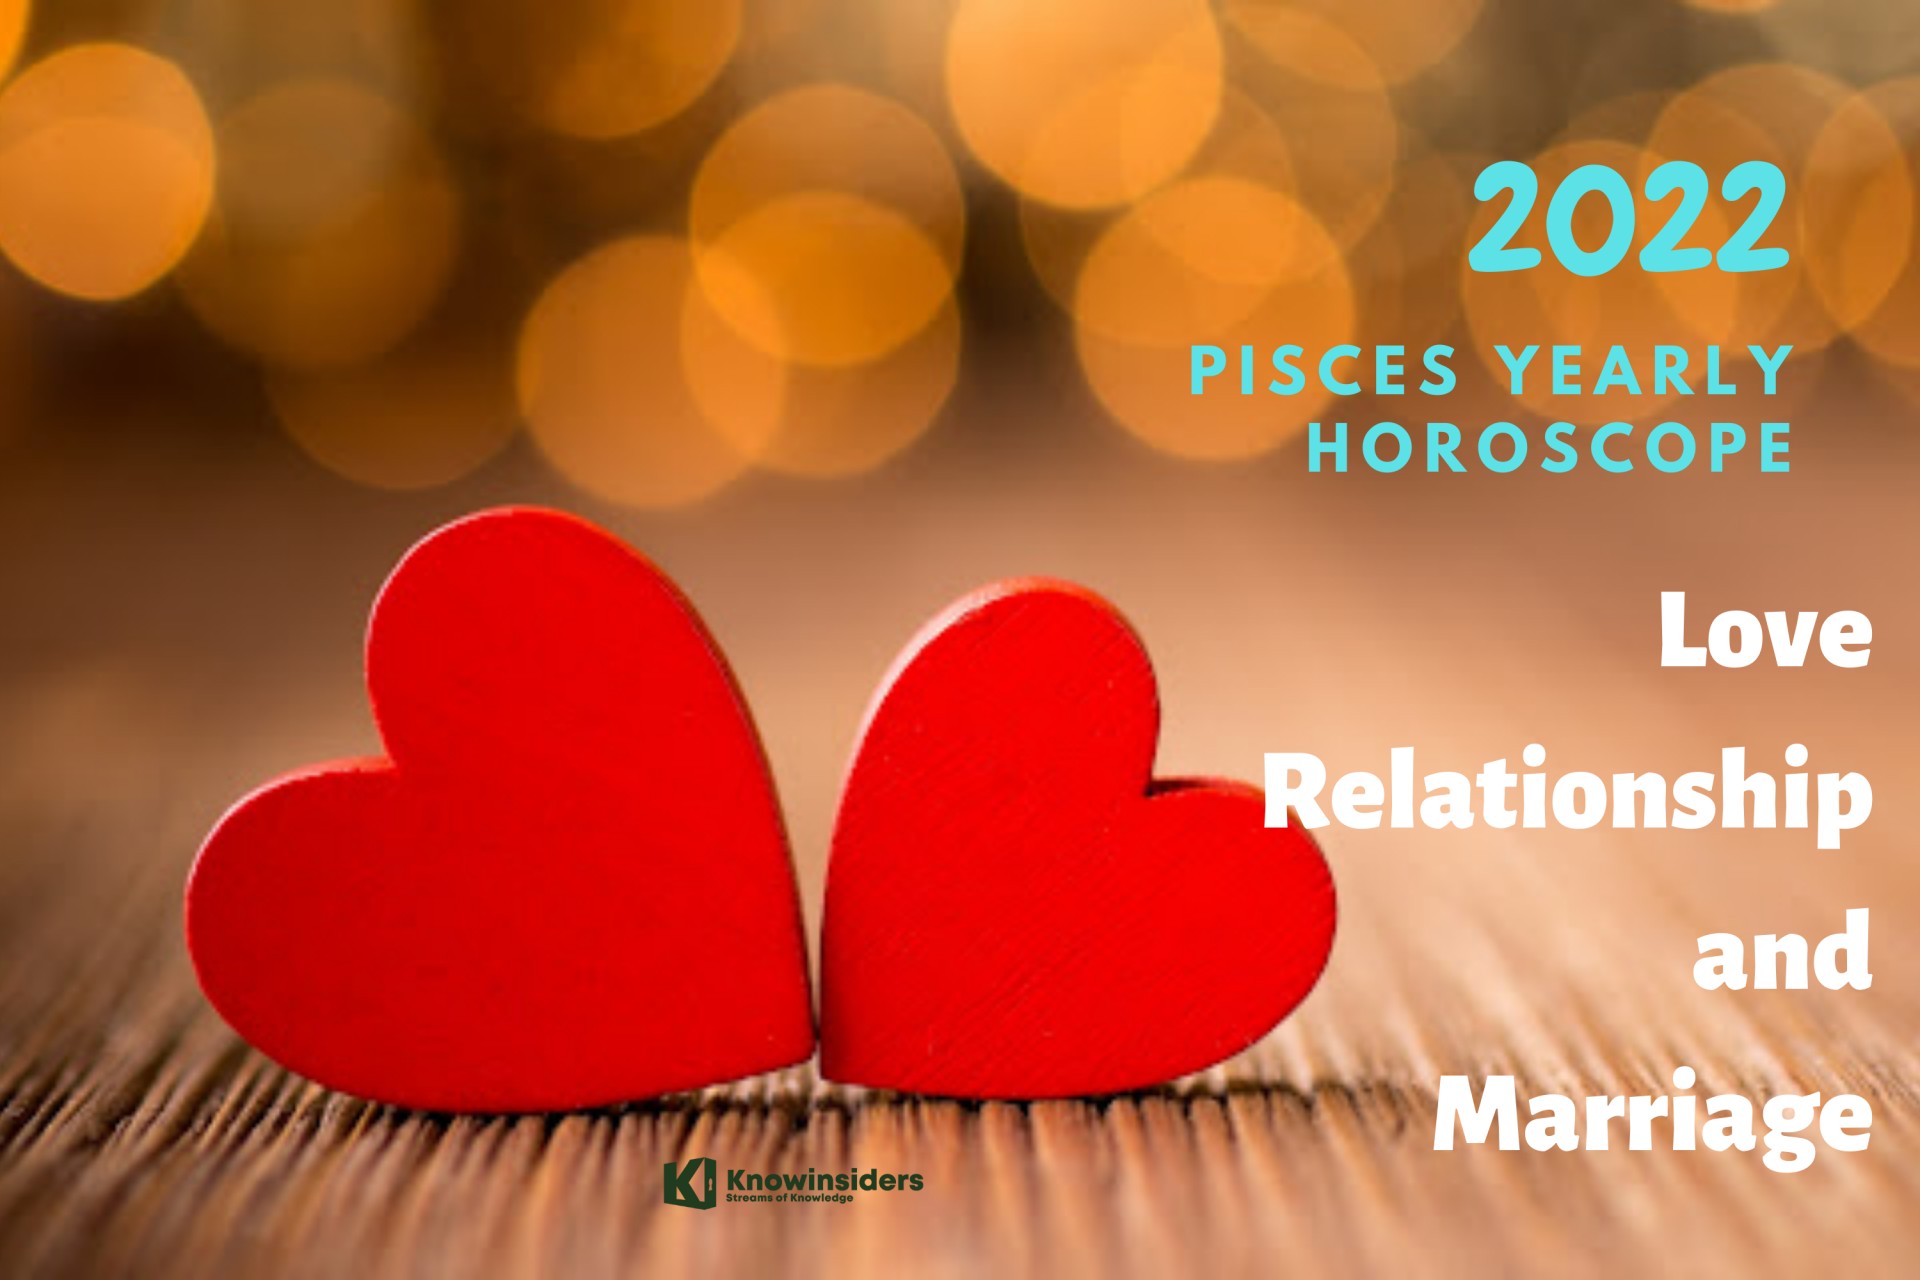 PISCES Yearly Horoscope 2022: Predictions for Love, Relationship and Marriage